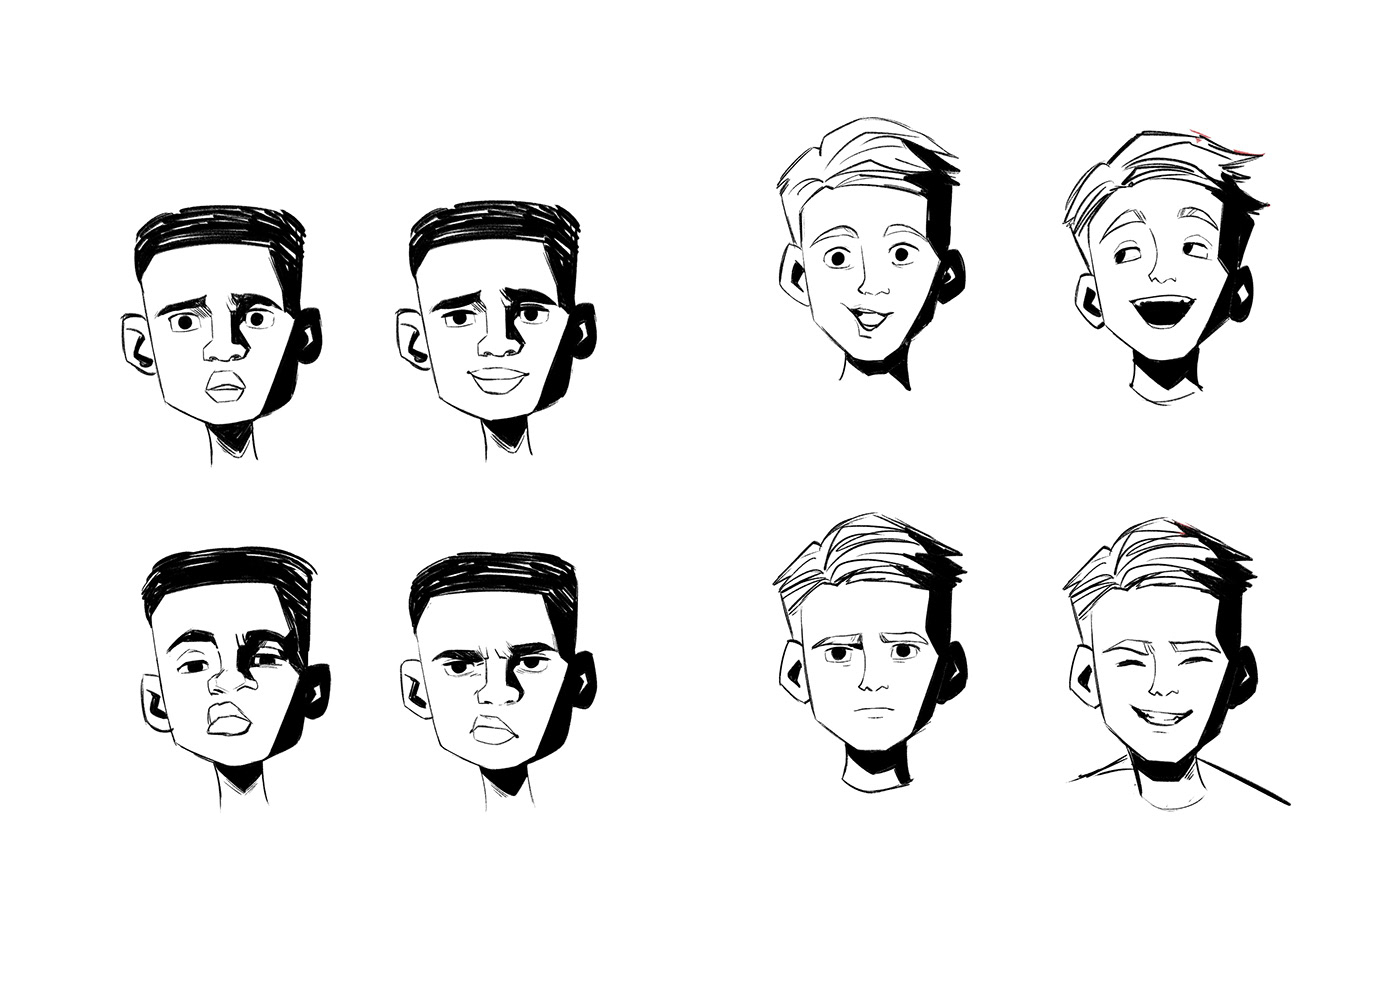 2D 2D Animation 2d character Character character animation expressions turnaround portfolio